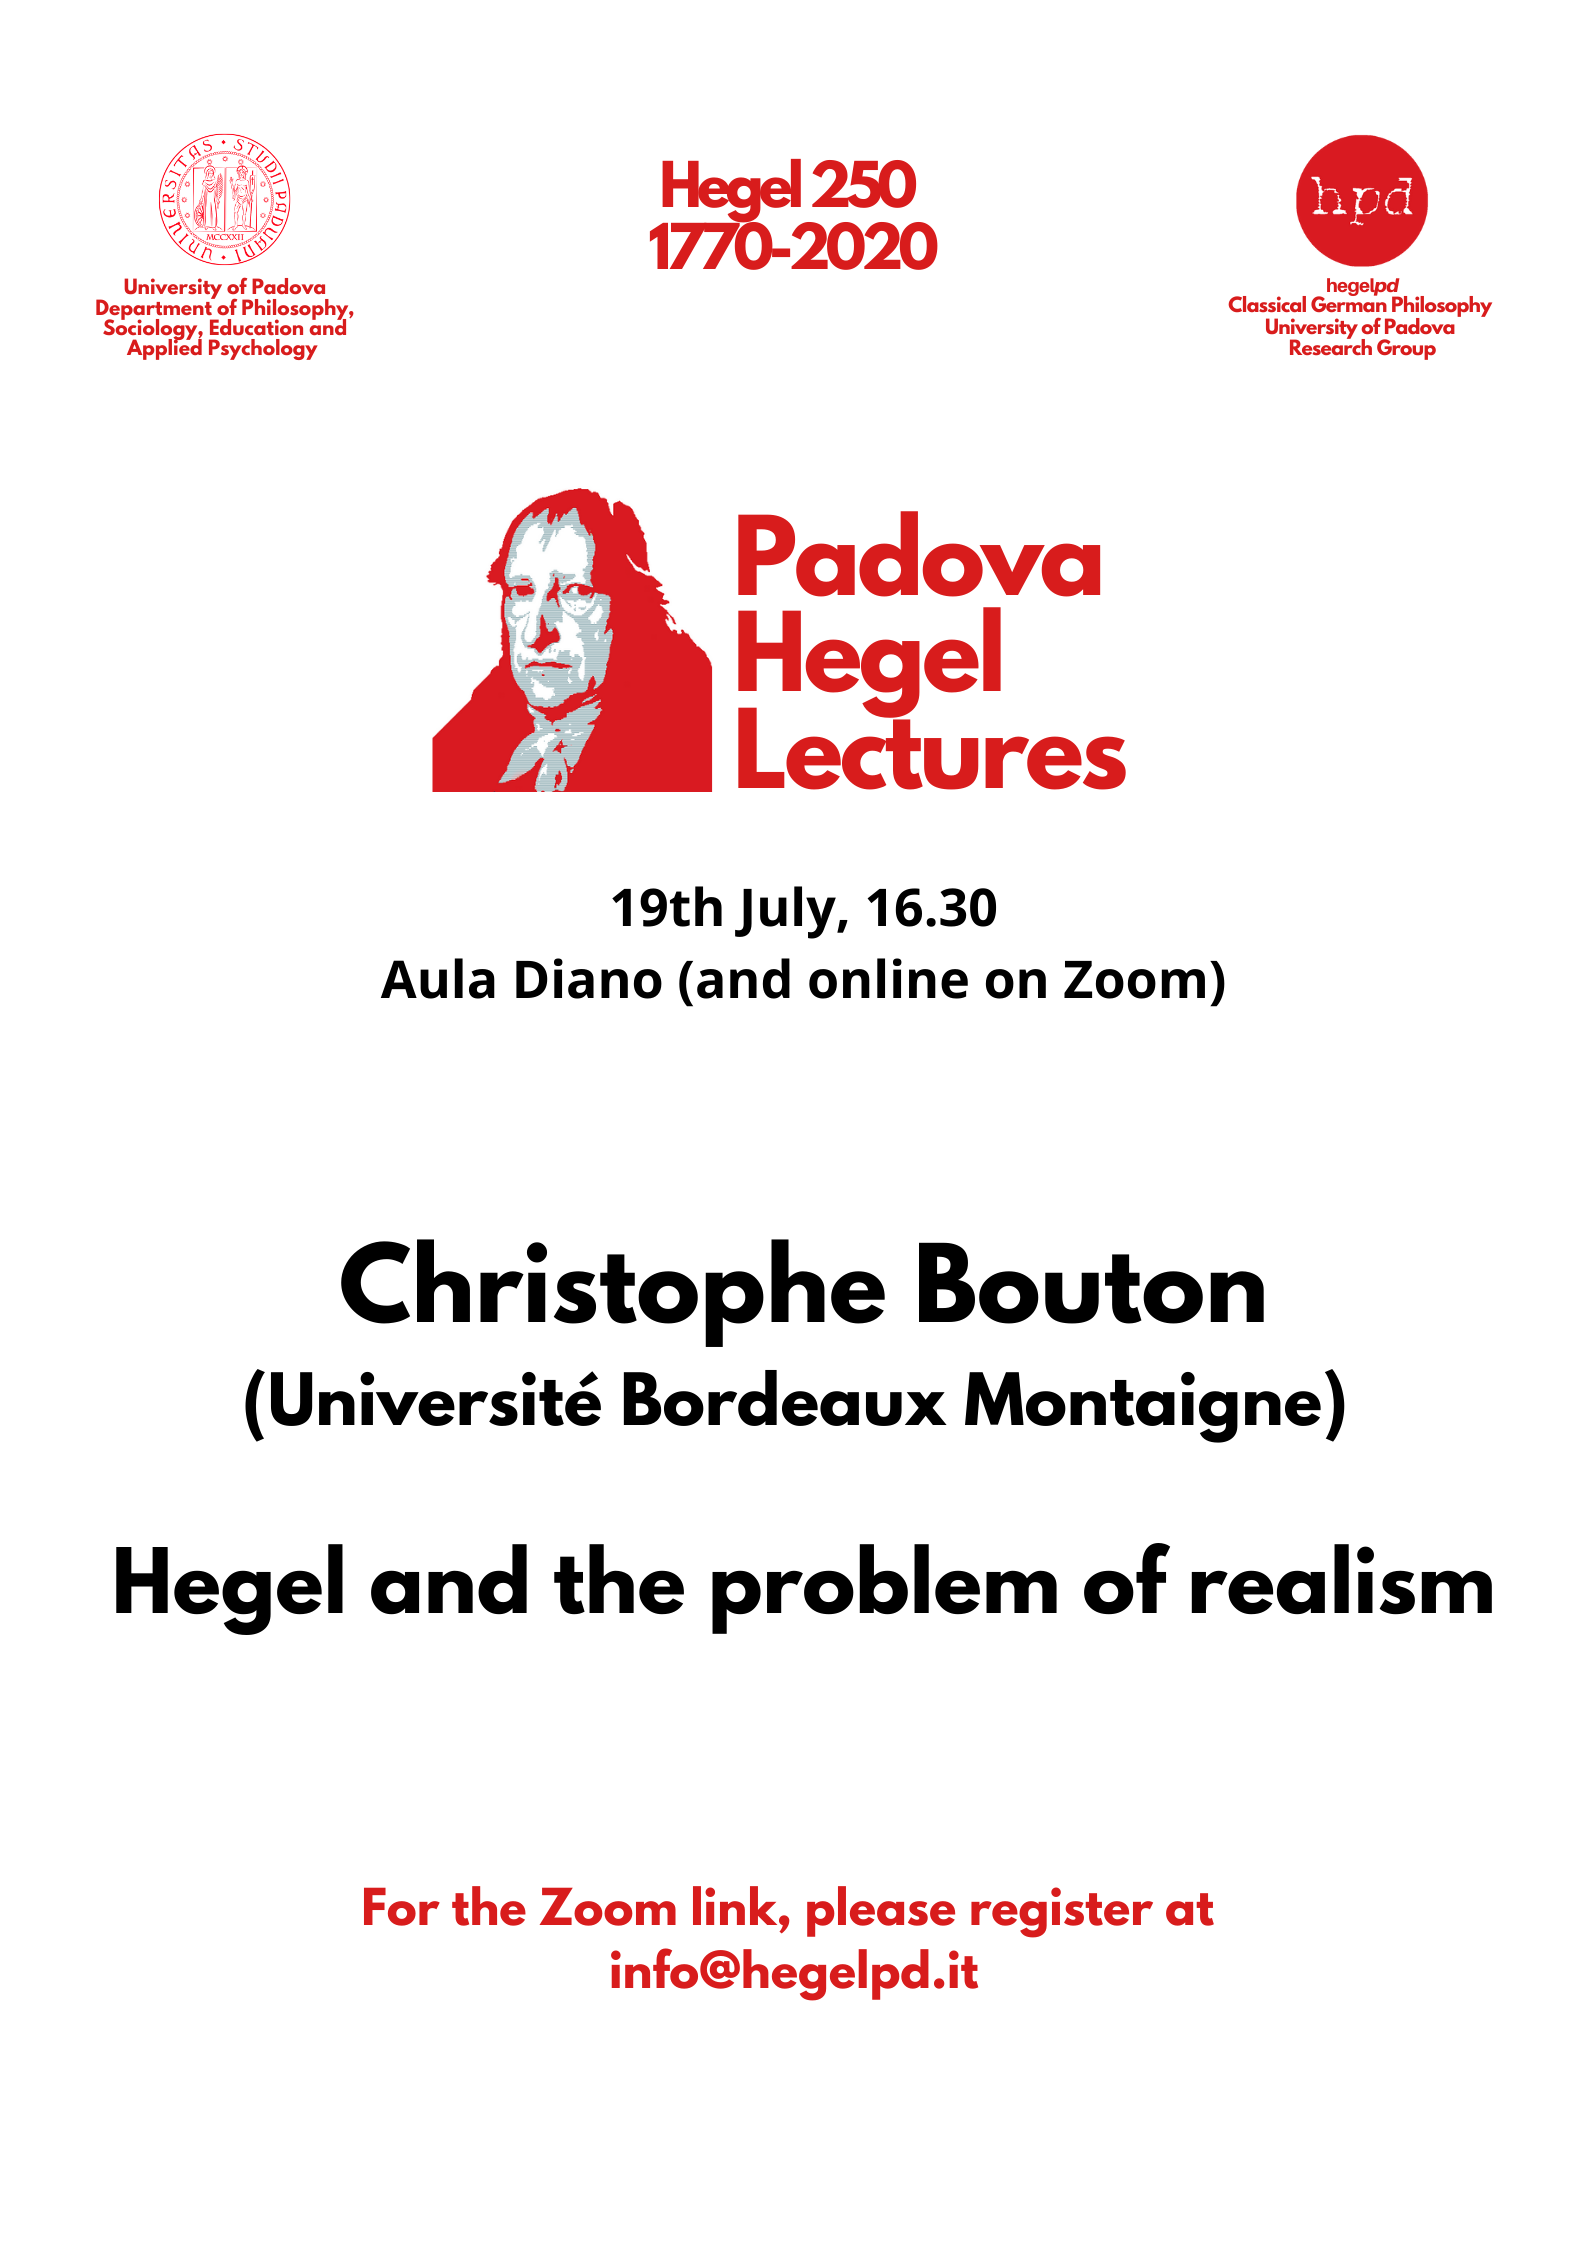 hpd – Padova Hegel Lecture 2020: Christophe Bouton, “Hegel and the problem of realism” (Padova, July 19, 2022)